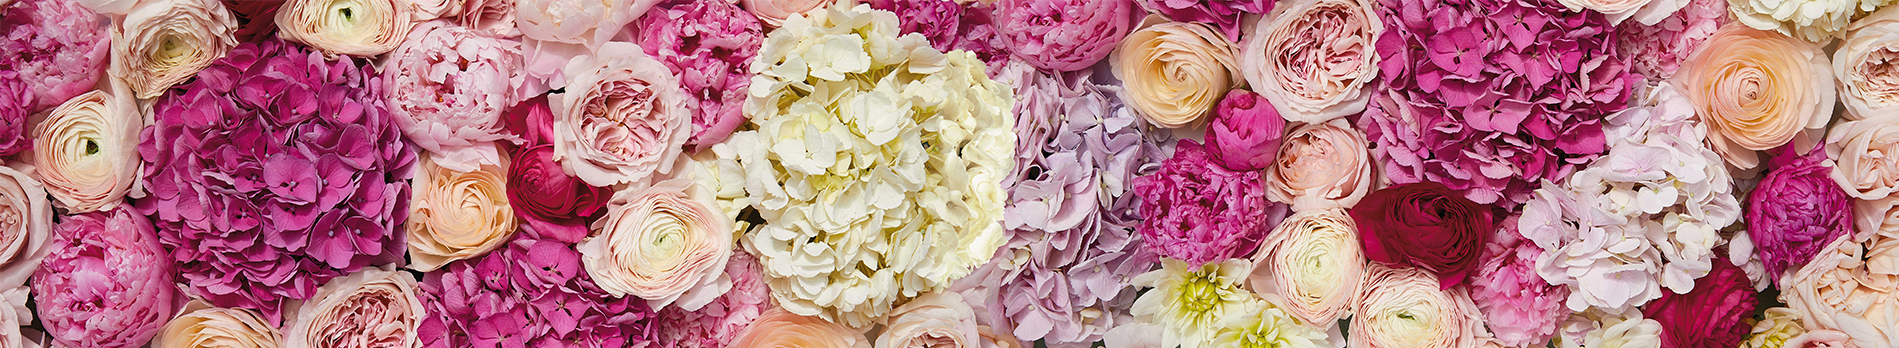 Mother's Day background filled with pink and white hydrangea and ranunculus flowers.